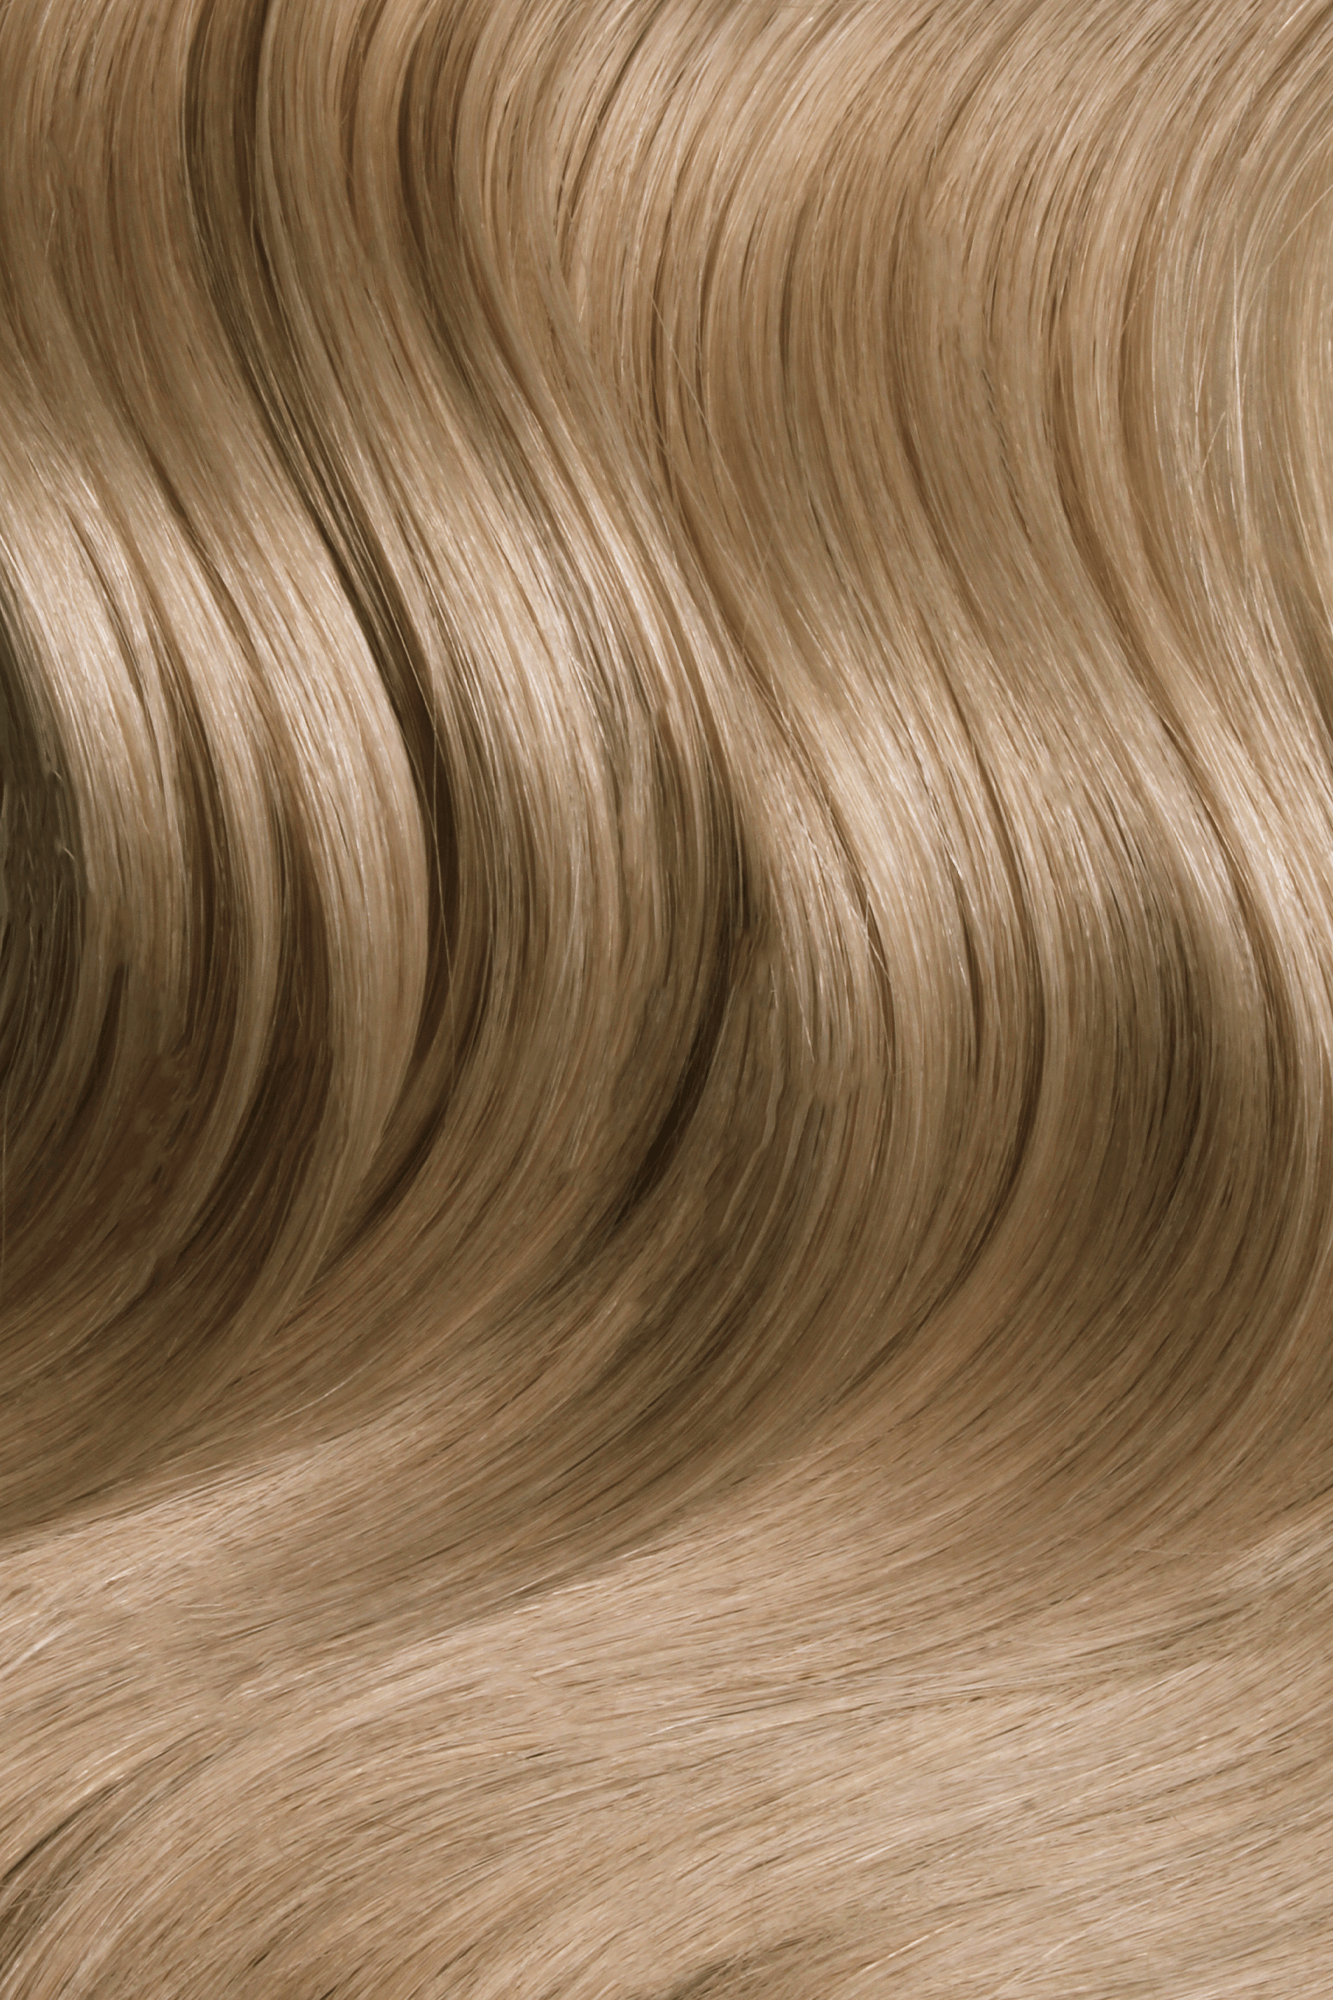 SEAMLESS® Tapes 16 Inches - SWAY Hair Extensions Ash-Blondette-7-20 clip-in hair extensions made of 100% Double Drawn, Remy Human Hair. SWAY SEAMLESS® Tapes, 16 inches. Lightweight, flexible, and perfect for any hairstyle.